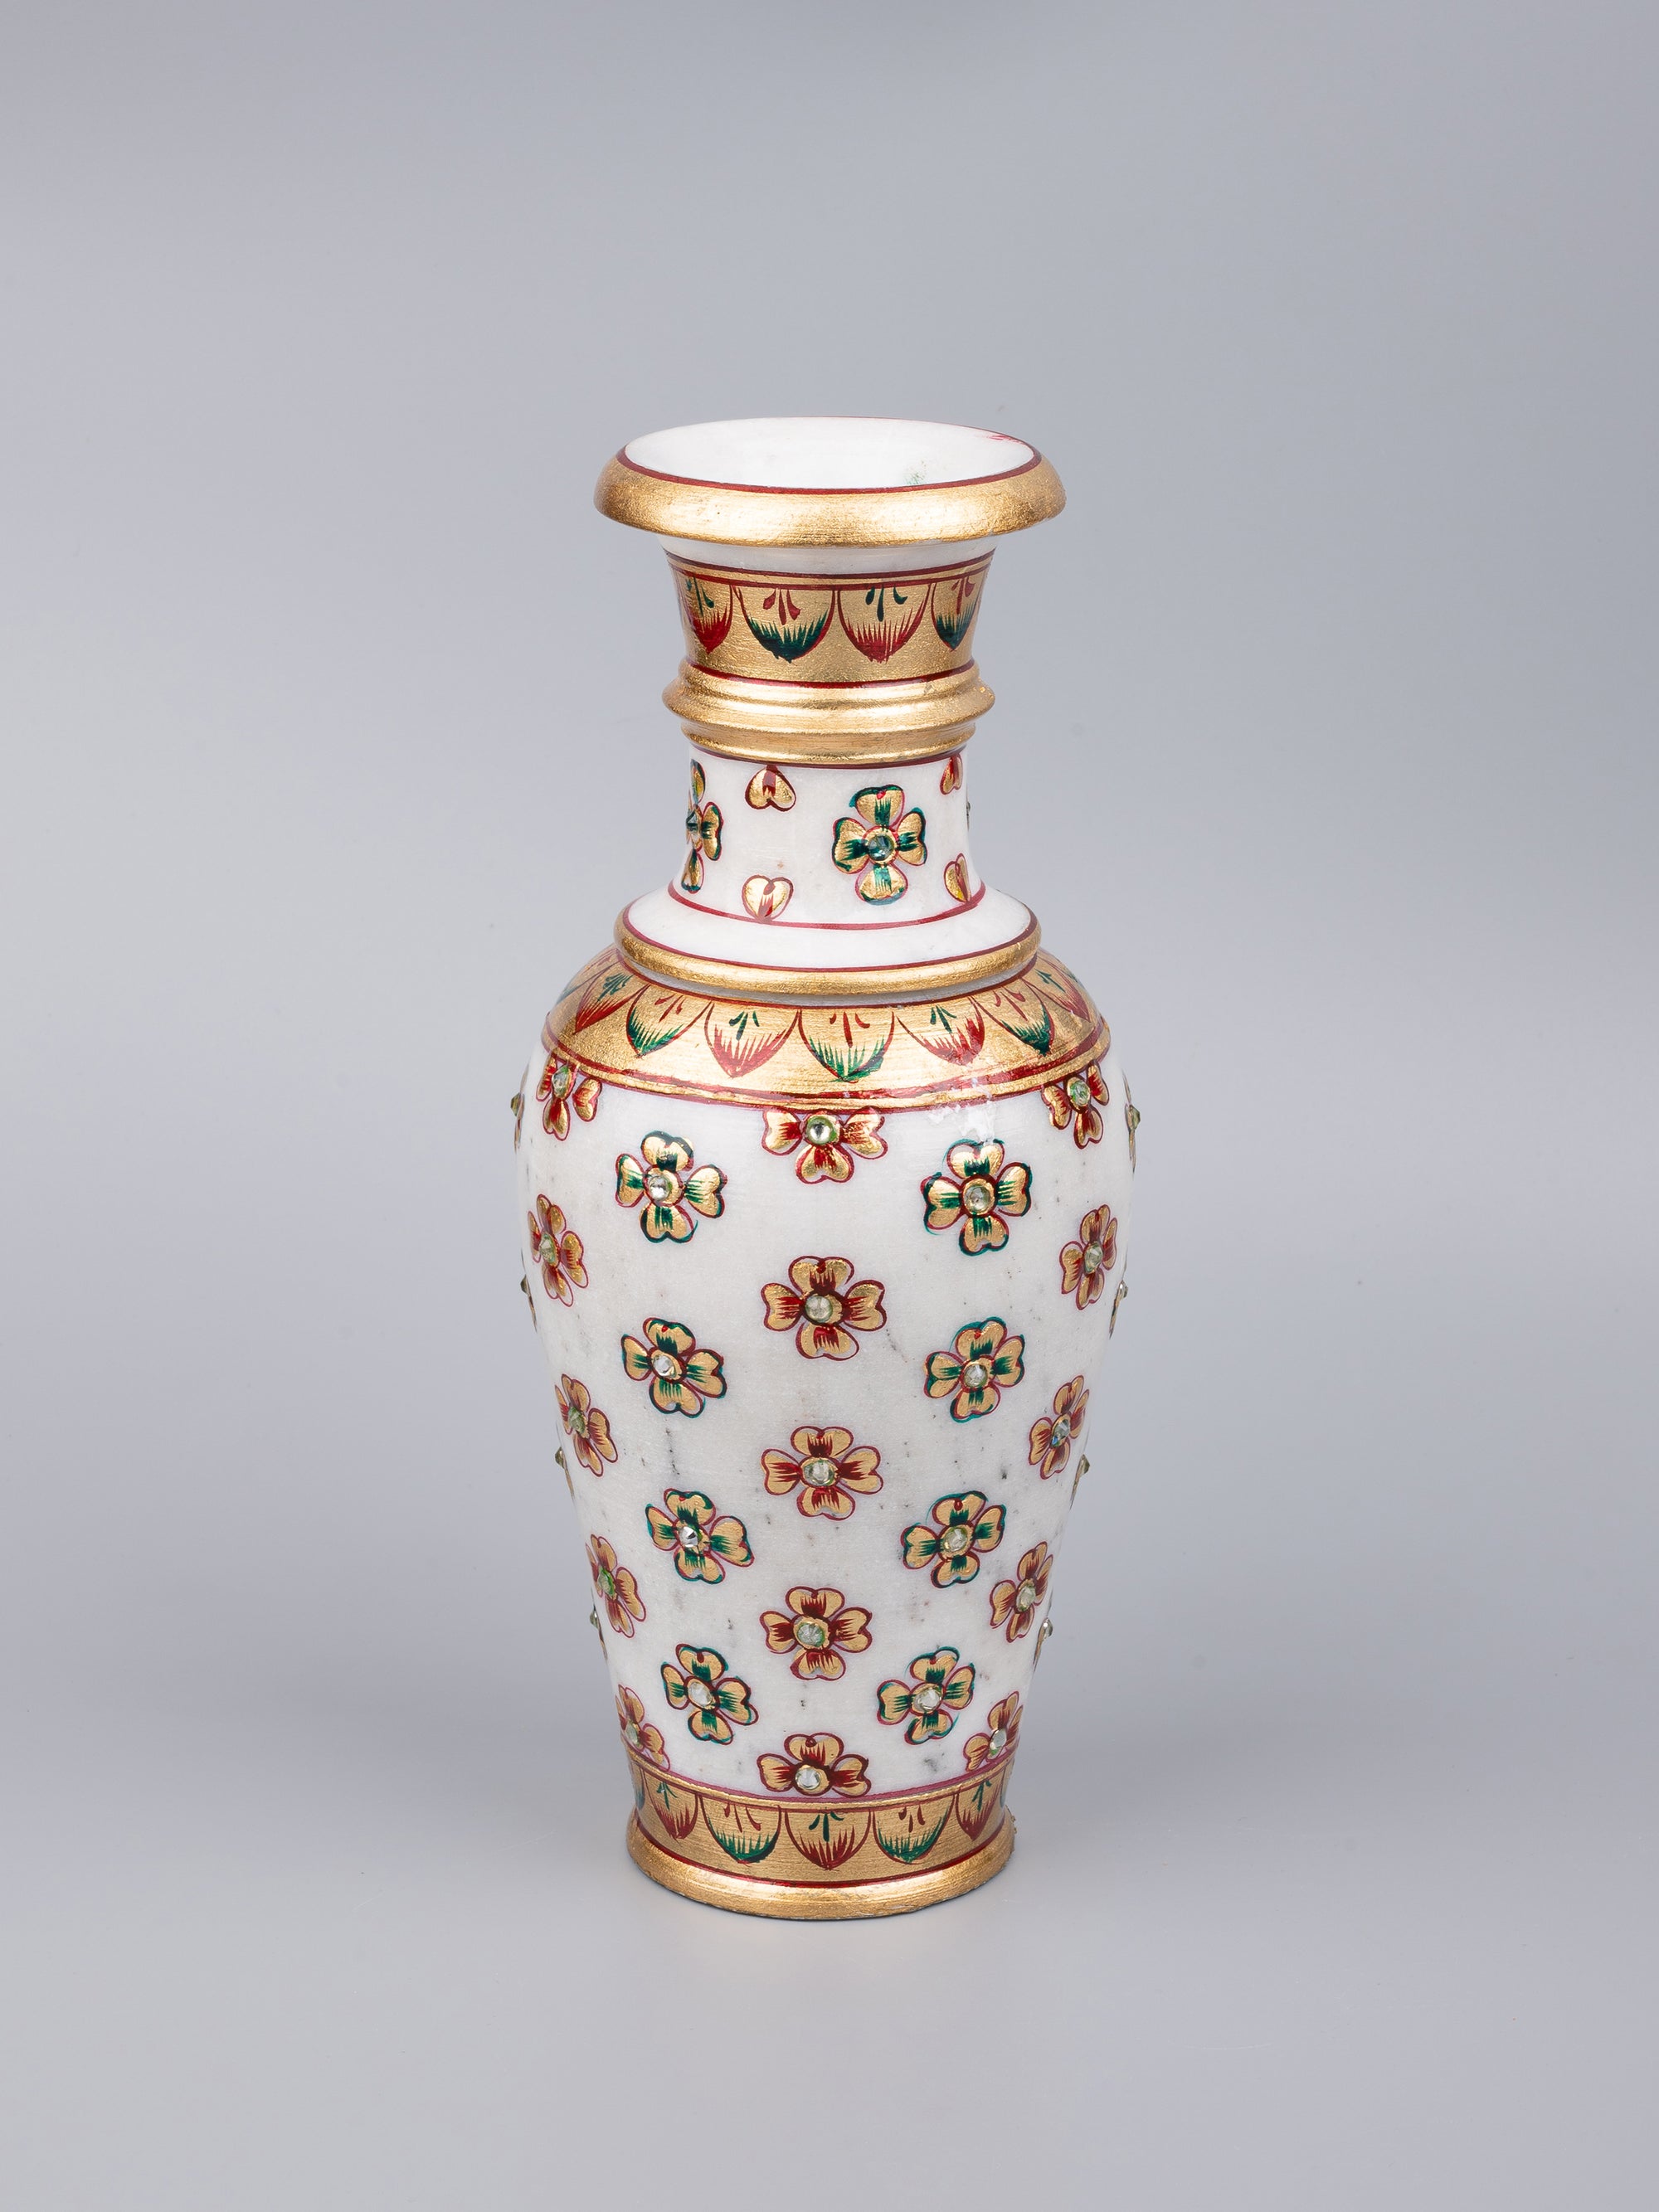 9 inches marble flower vase with colorful meenakari work - The Heritage Artifacts